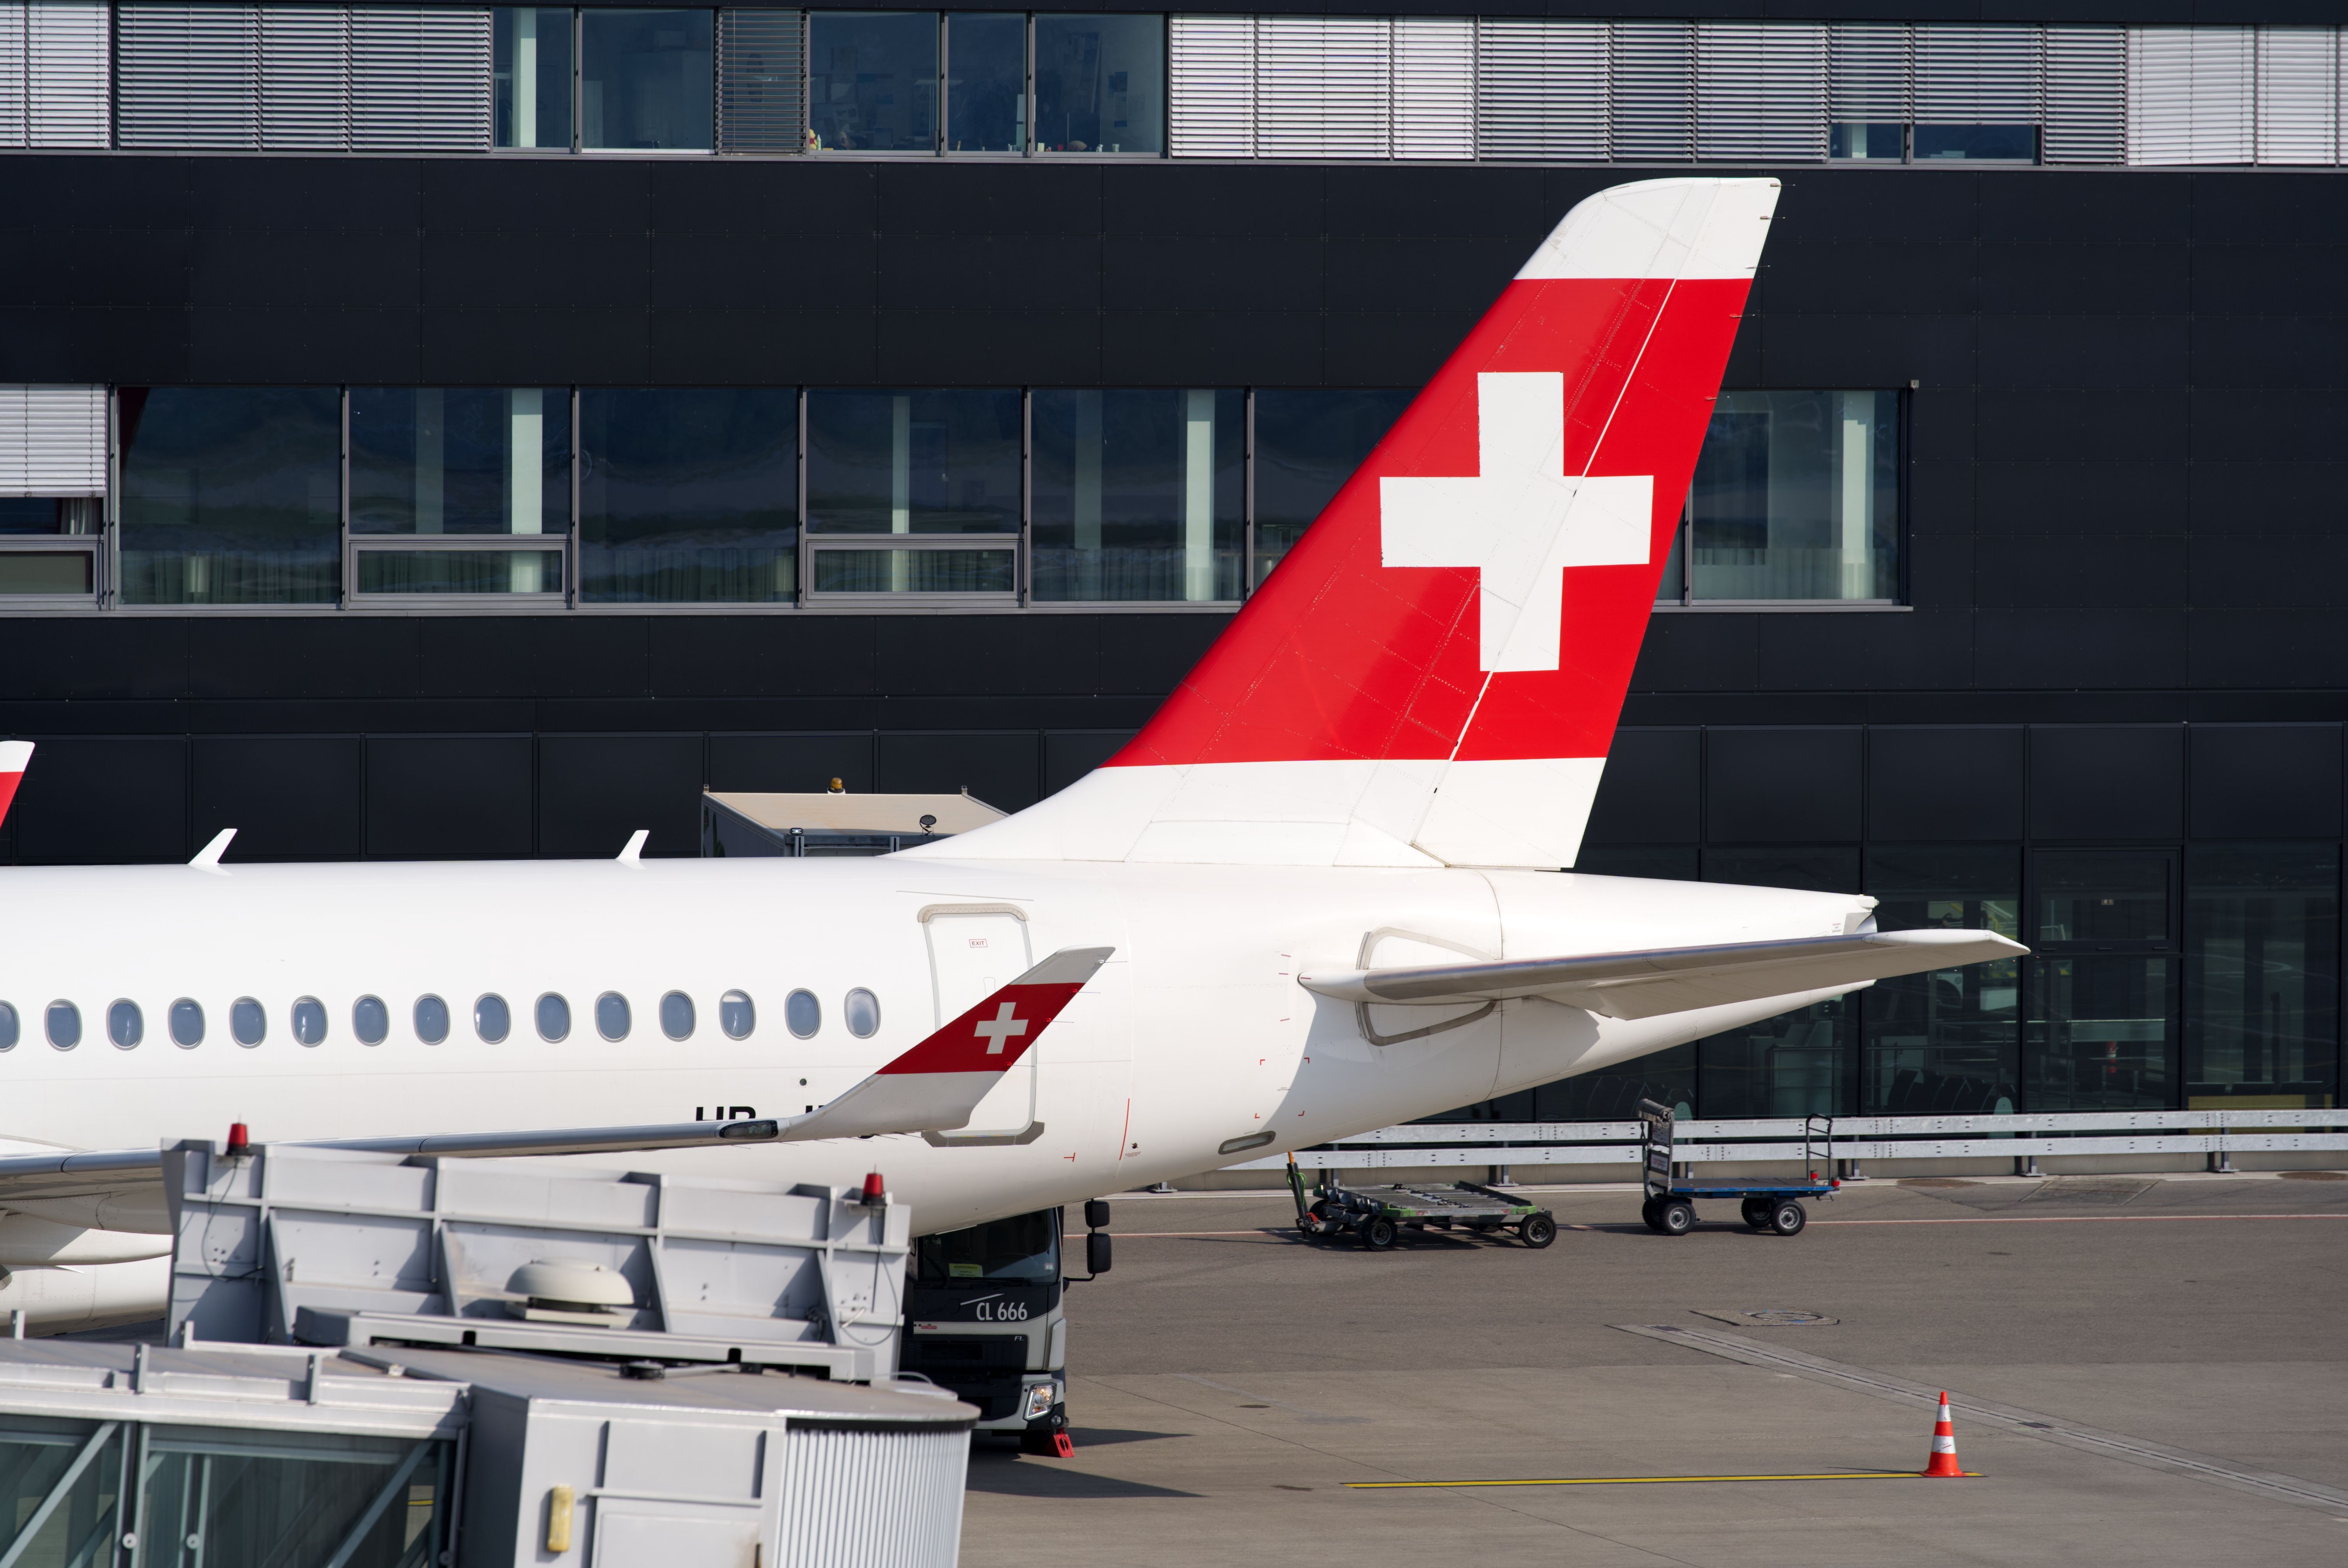 A Swiss Airbus A220 jet parked at an airport